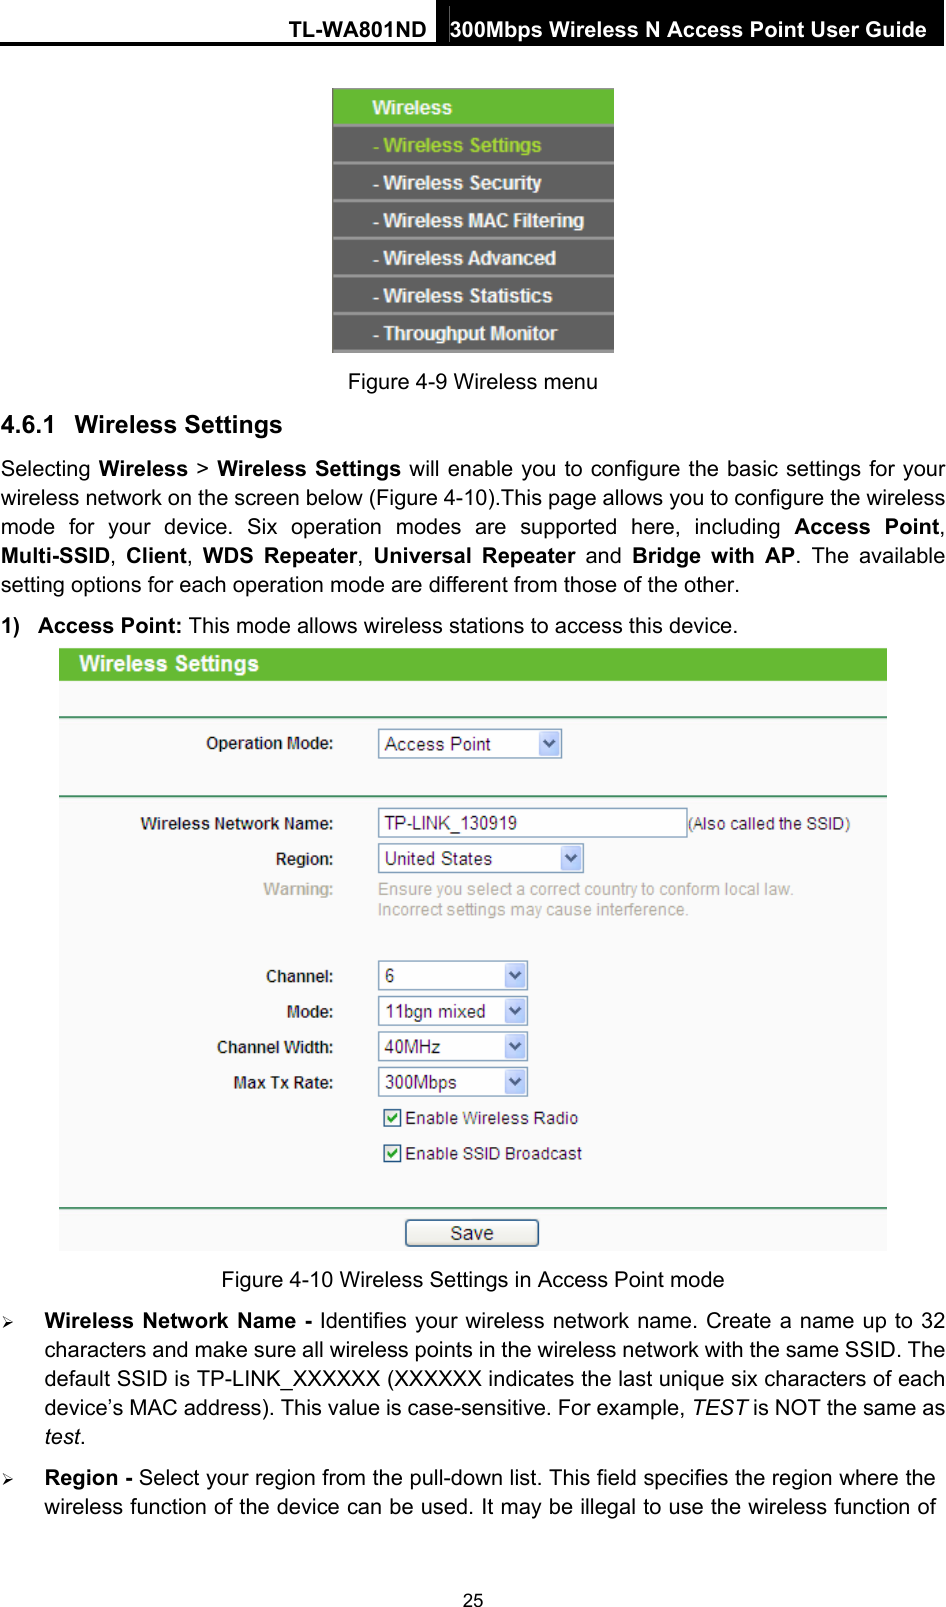 TL-WA801ND 300Mbps Wireless N Access Point User Guide  Figure 4-9 Wireless menu 4.6.1  Wireless Settings Selecting Wireless &gt; Wireless Settings will enable you to configure the basic settings for your wireless network on the screen below (Figure 4-10).This page allows you to configure the wireless mode for your device. Six operation modes are supported here, including Access Point, Multi-SSID,  Client,  WDS Repeater,  Universal Repeater and  Bridge with AP. The available setting options for each operation mode are different from those of the other. 1) Access Point: This mode allows wireless stations to access this device.  Figure 4-10 Wireless Settings in Access Point mode  Wireless Network Name - Identifies your wireless network name. Create a name up to 32 characters and make sure all wireless points in the wireless network with the same SSID. The default SSID is TP-LINK_XXXXXX (XXXXXX indicates the last unique six characters of each device’s MAC address). This value is case-sensitive. For example, TEST is NOT the same as test.  Region - Select your region from the pull-down list. This field specifies the region where the wireless function of the device can be used. It may be illegal to use the wireless function of 25 